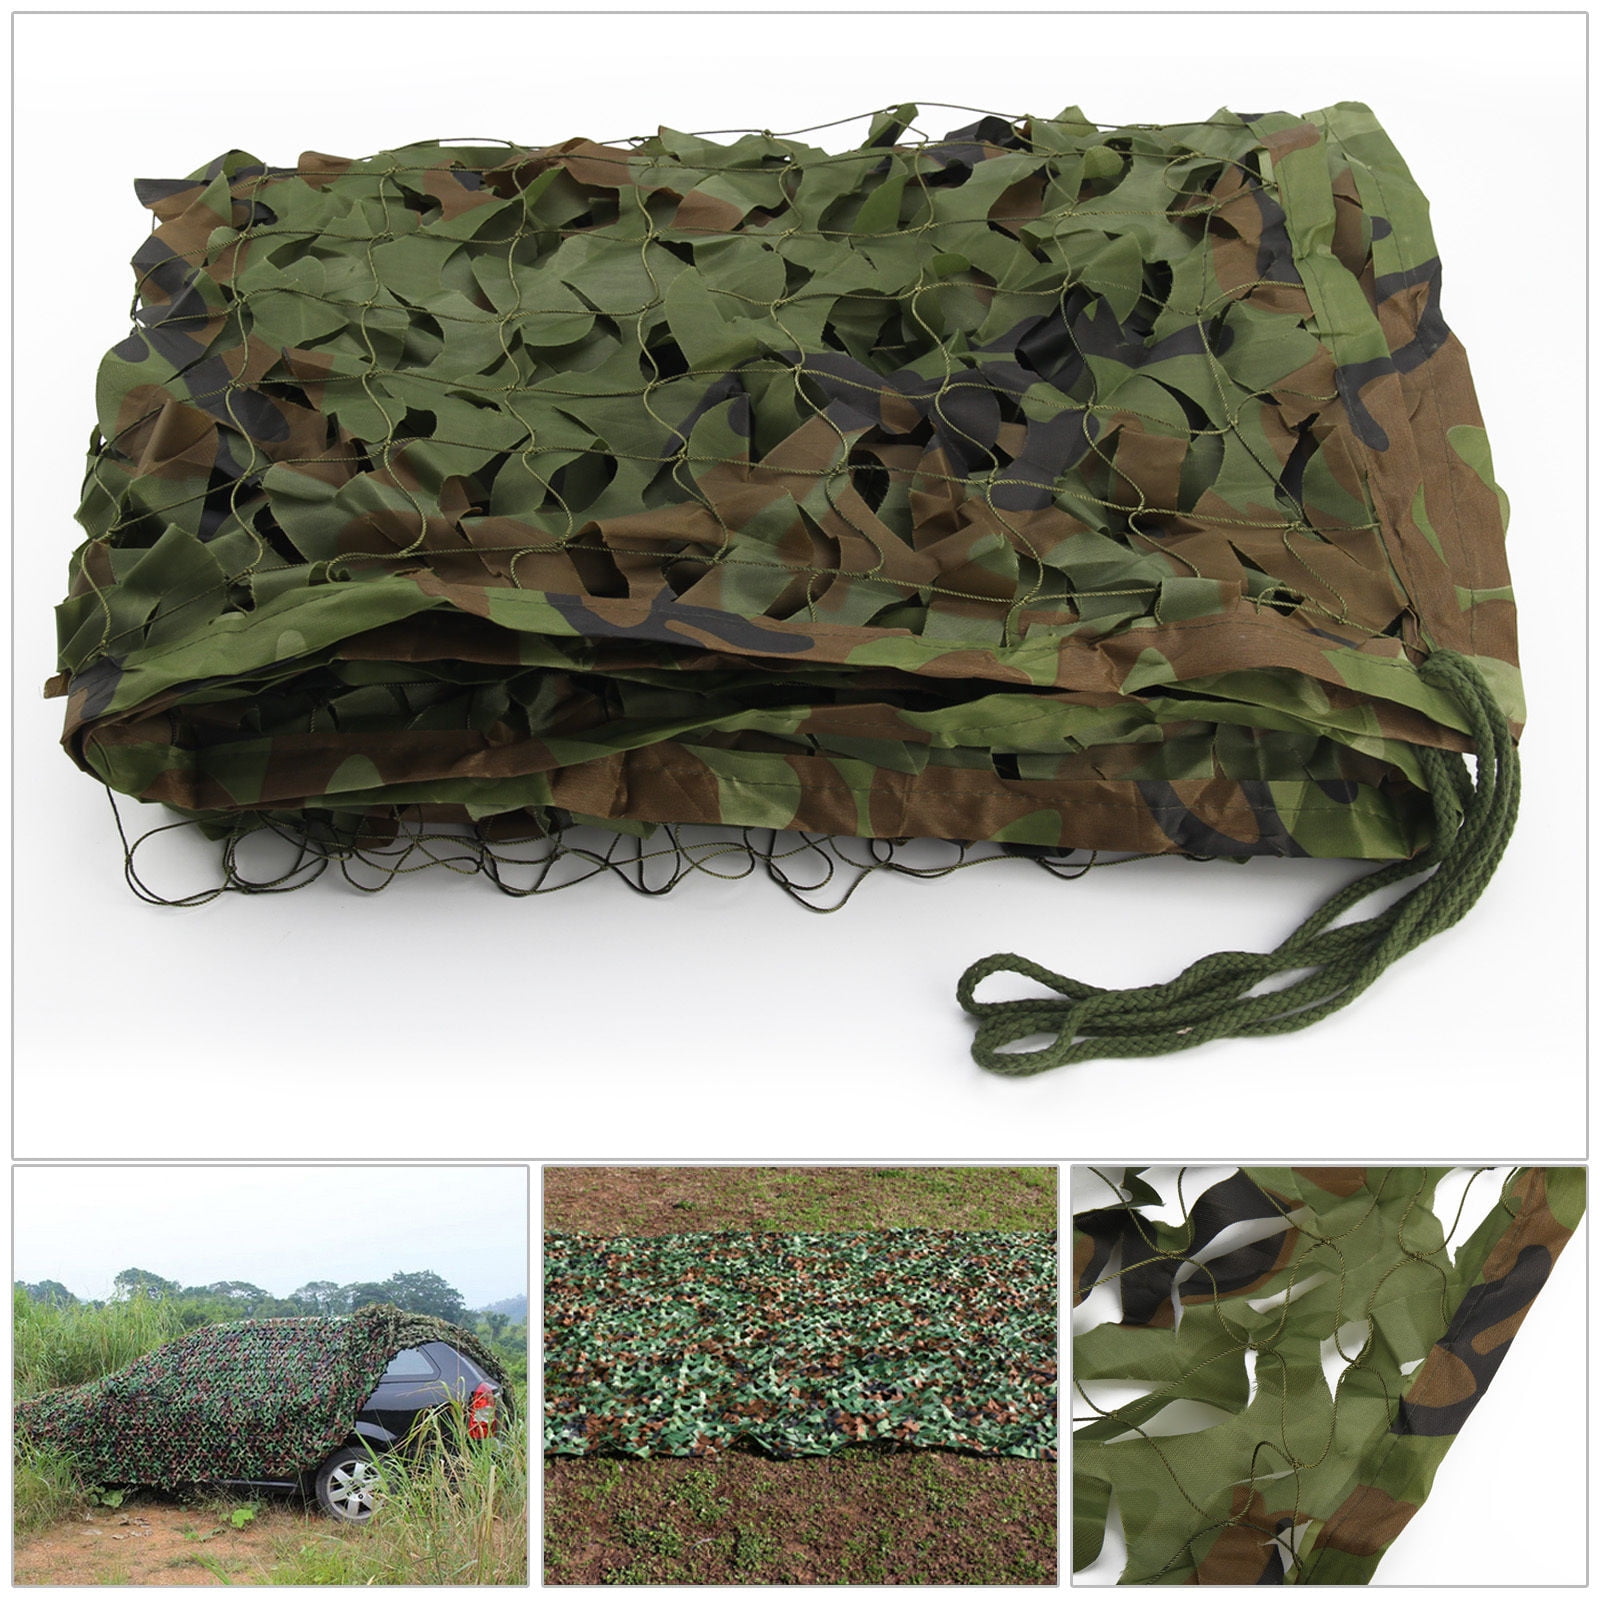 NEW 7M X 1.5M Camouflage Net Hunting Hide Military Army Camping Camo Netting UK 